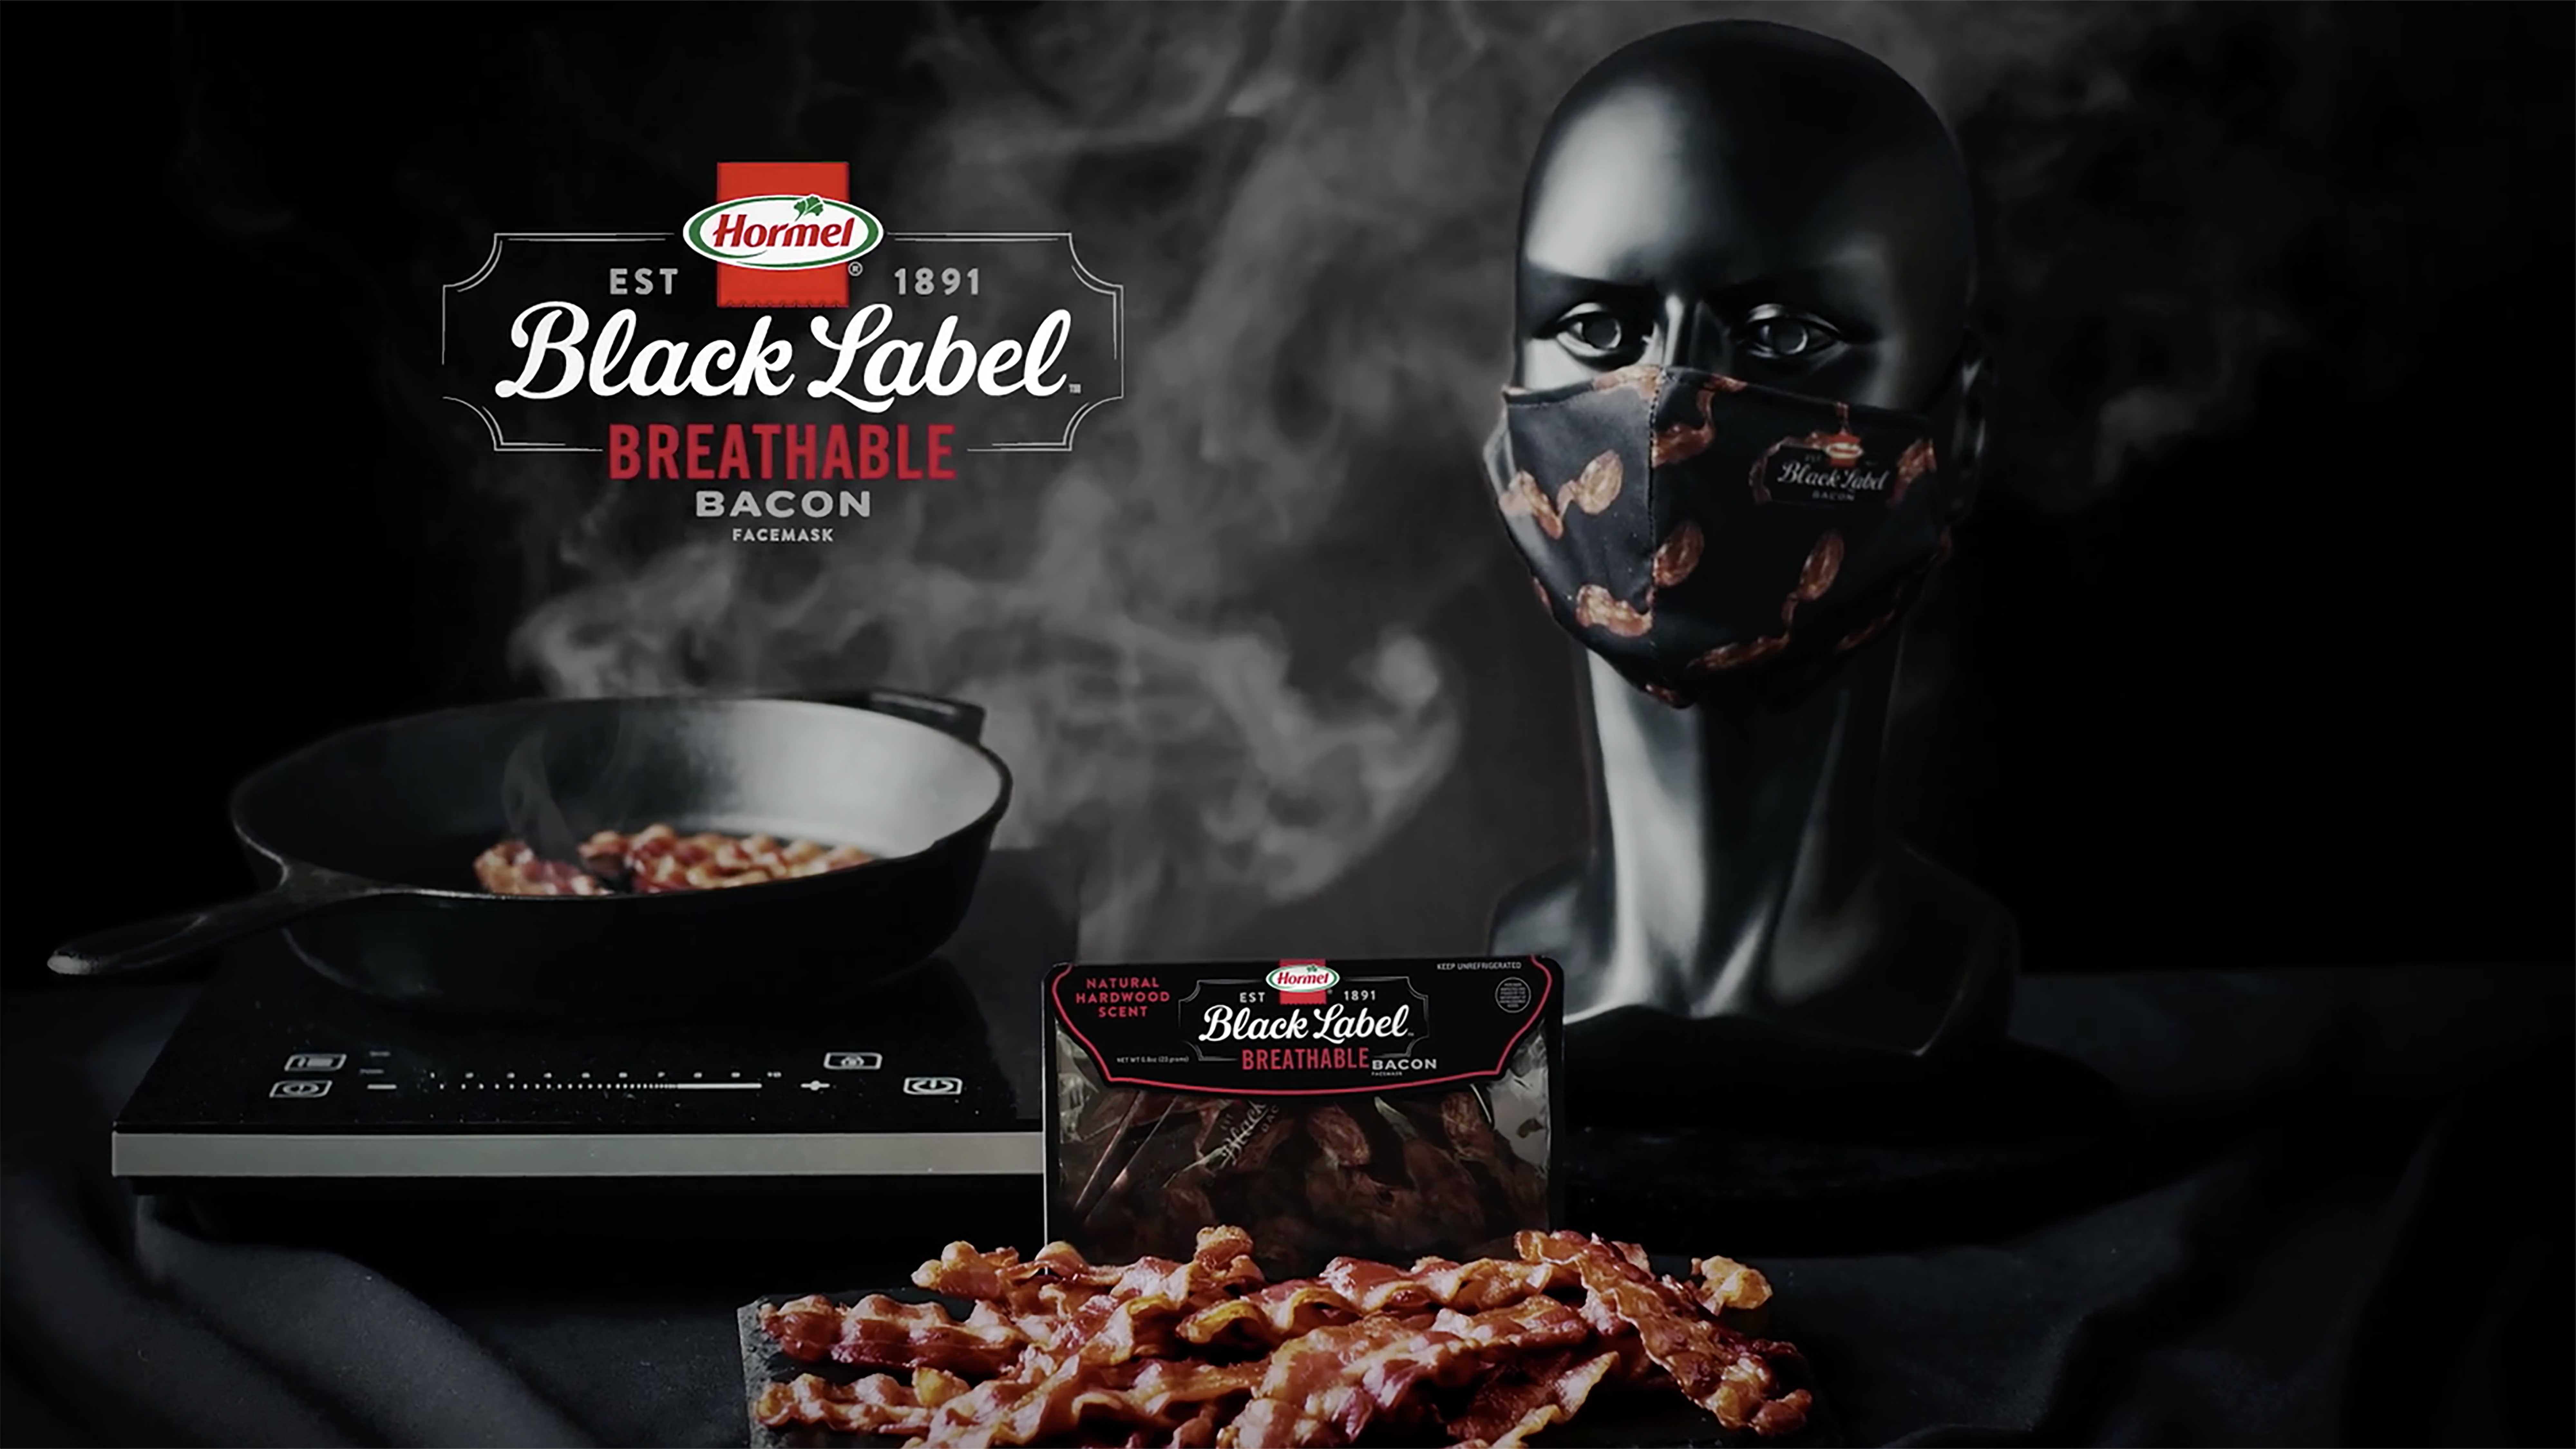 Promotion for Black Label Bacon by Nora Kubiaczyk